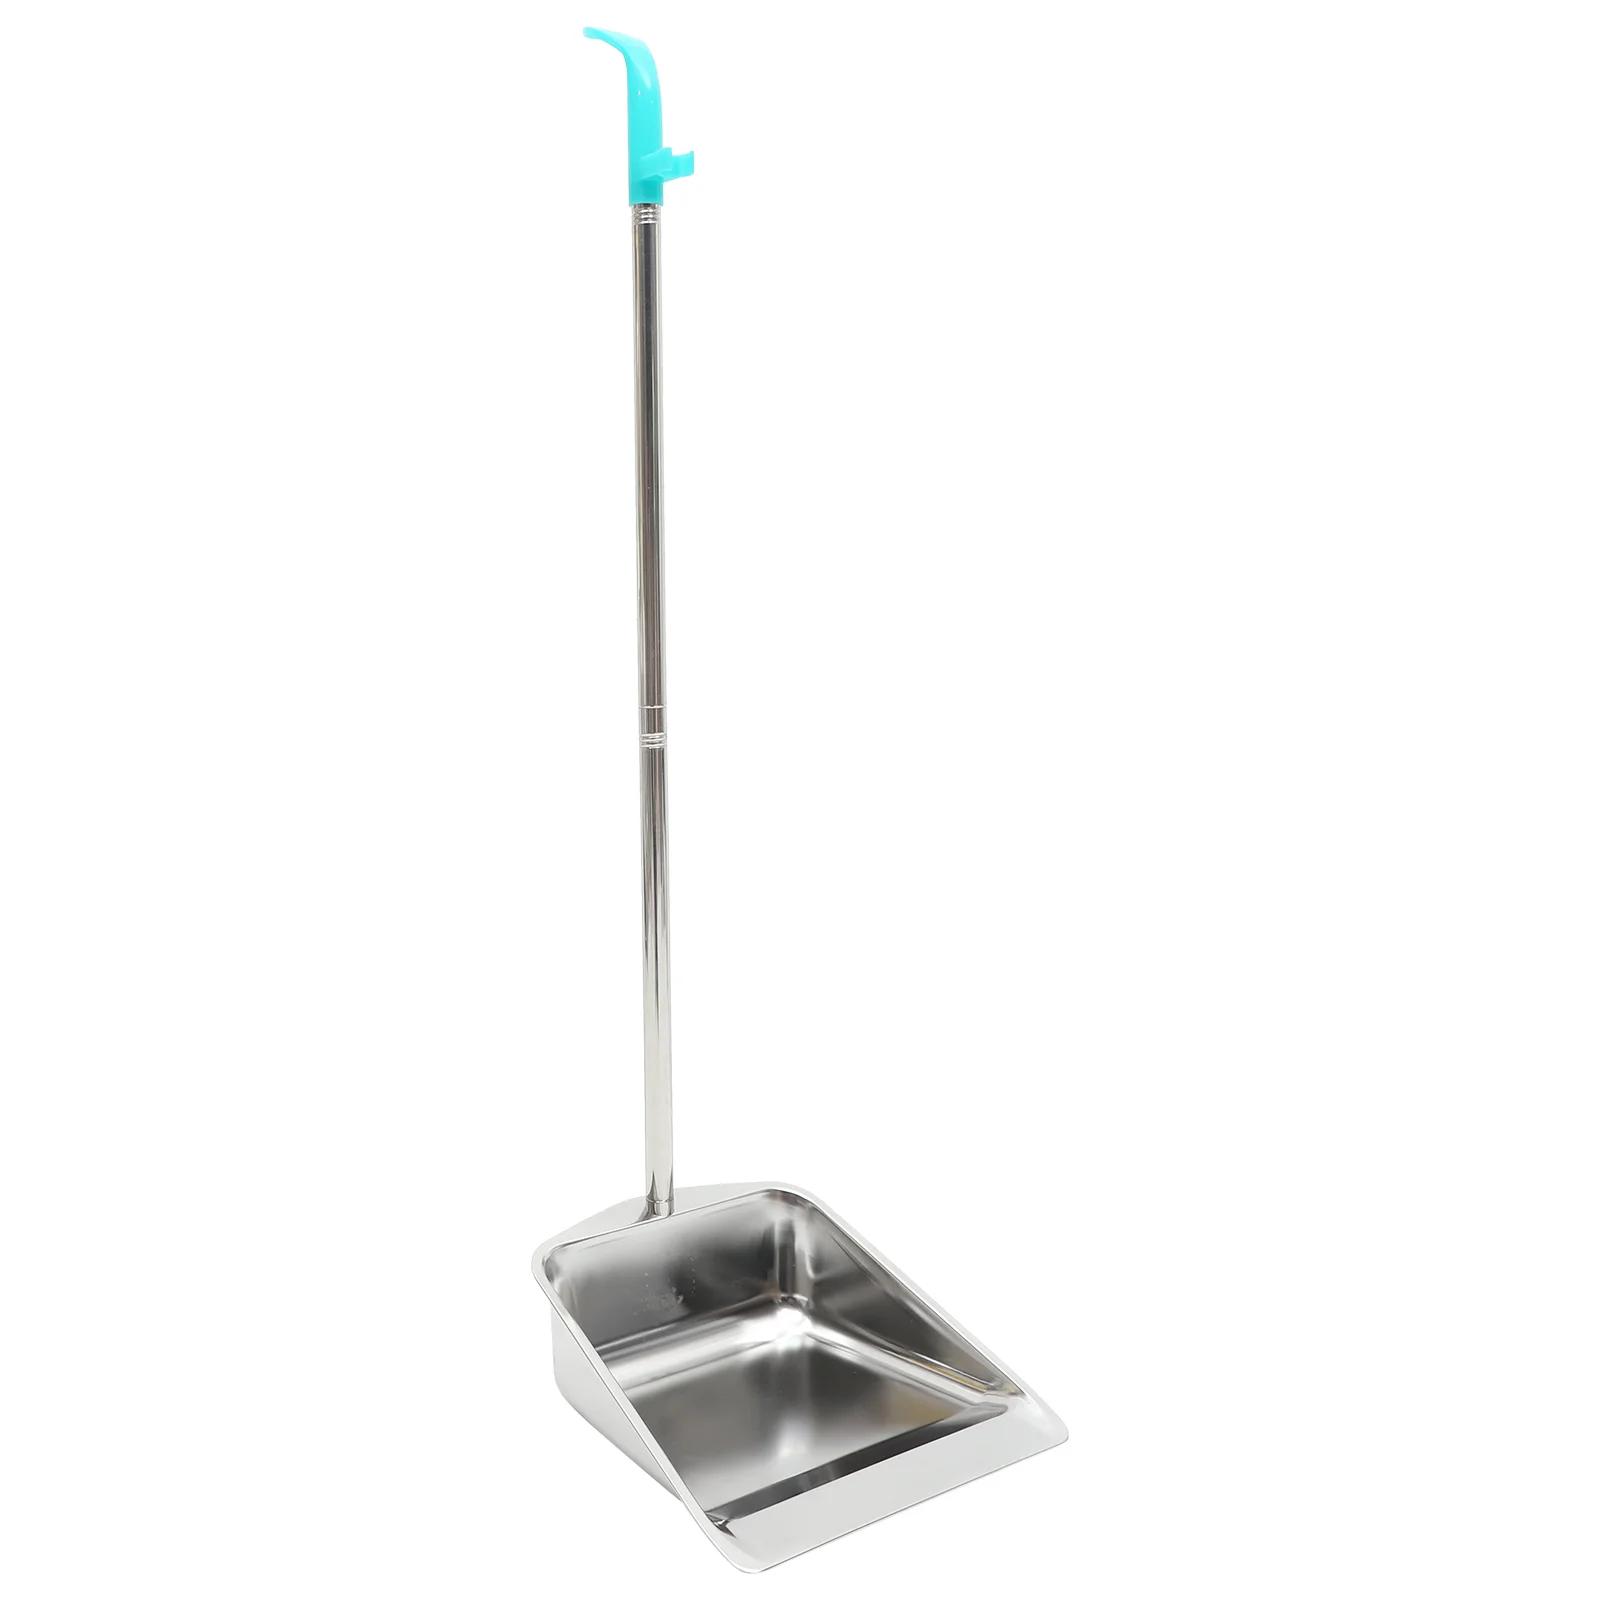 

Dustpan Cleaning Pan Handle Metal Upright Long Stand Up Tool Garbage Household Sweeping Trash Standing Lobby Dustpans Home